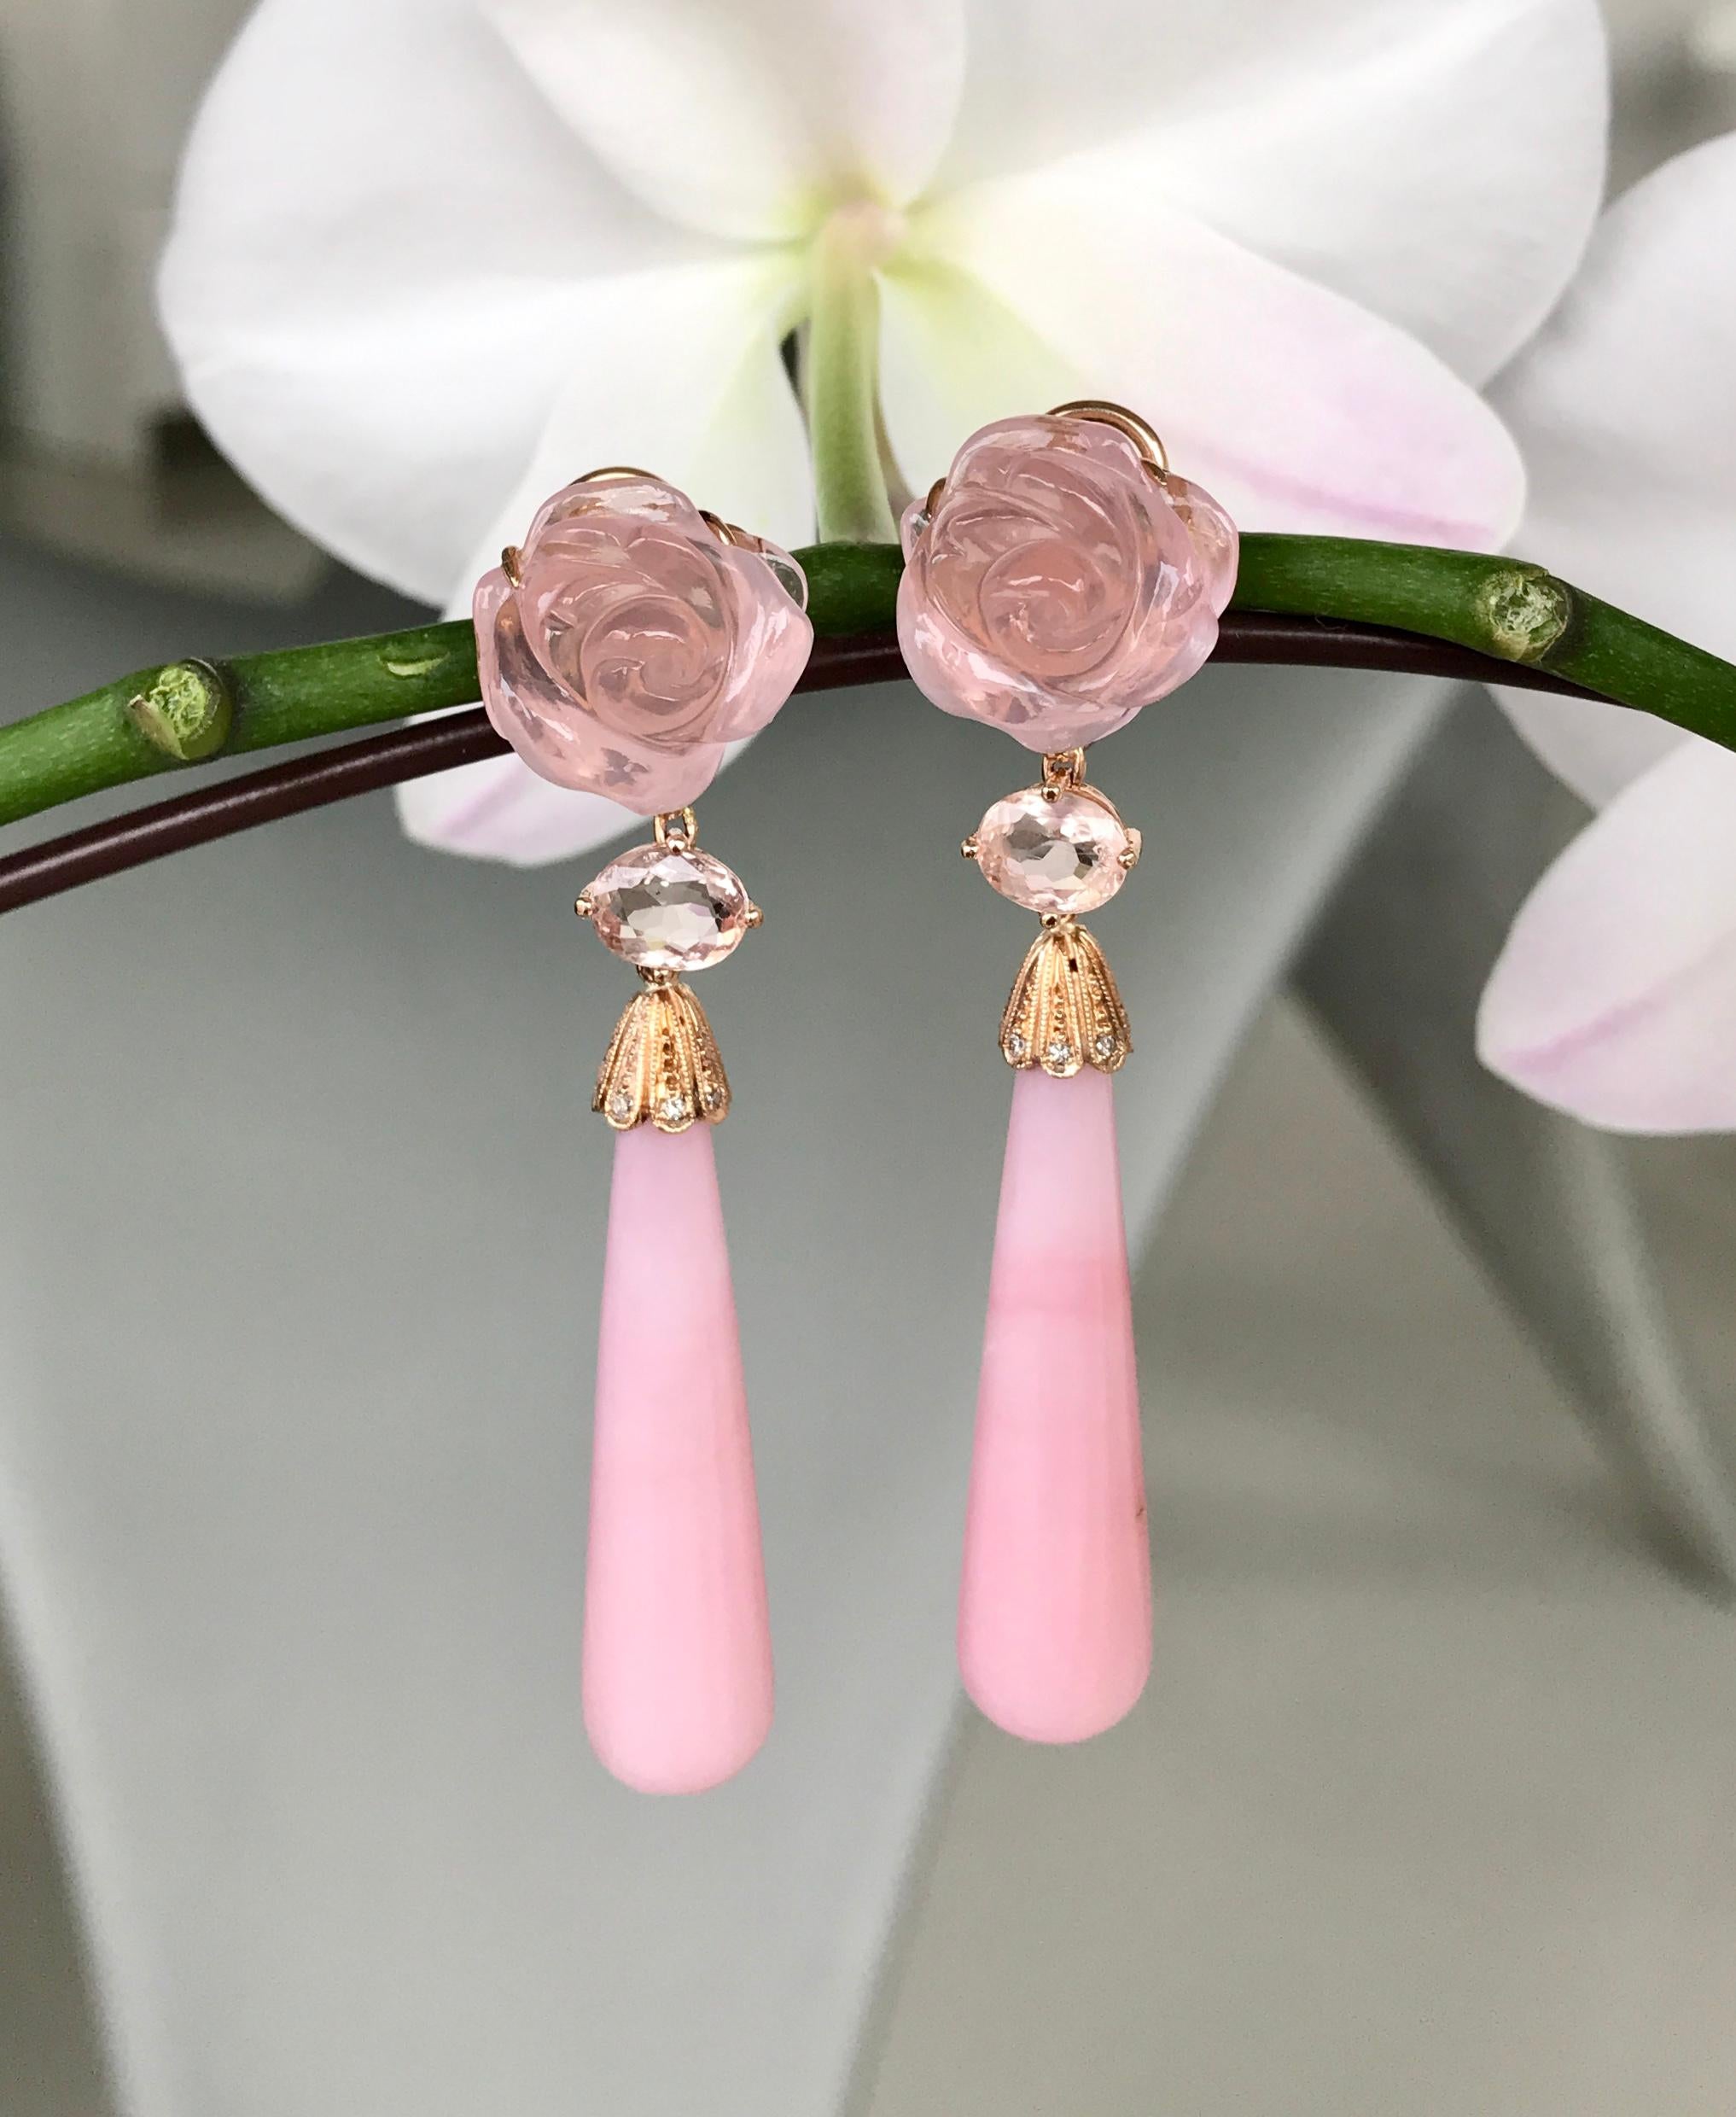 Earrings of rose quartz carved roses, tourmalines, pink opal drops and diamonds, handcrafted in 18 karat rose gold.

These exquisite one-of-a-kind dangle earrings of pink opals are paired with carved roses in rose quartz, pink tourmalines, and white